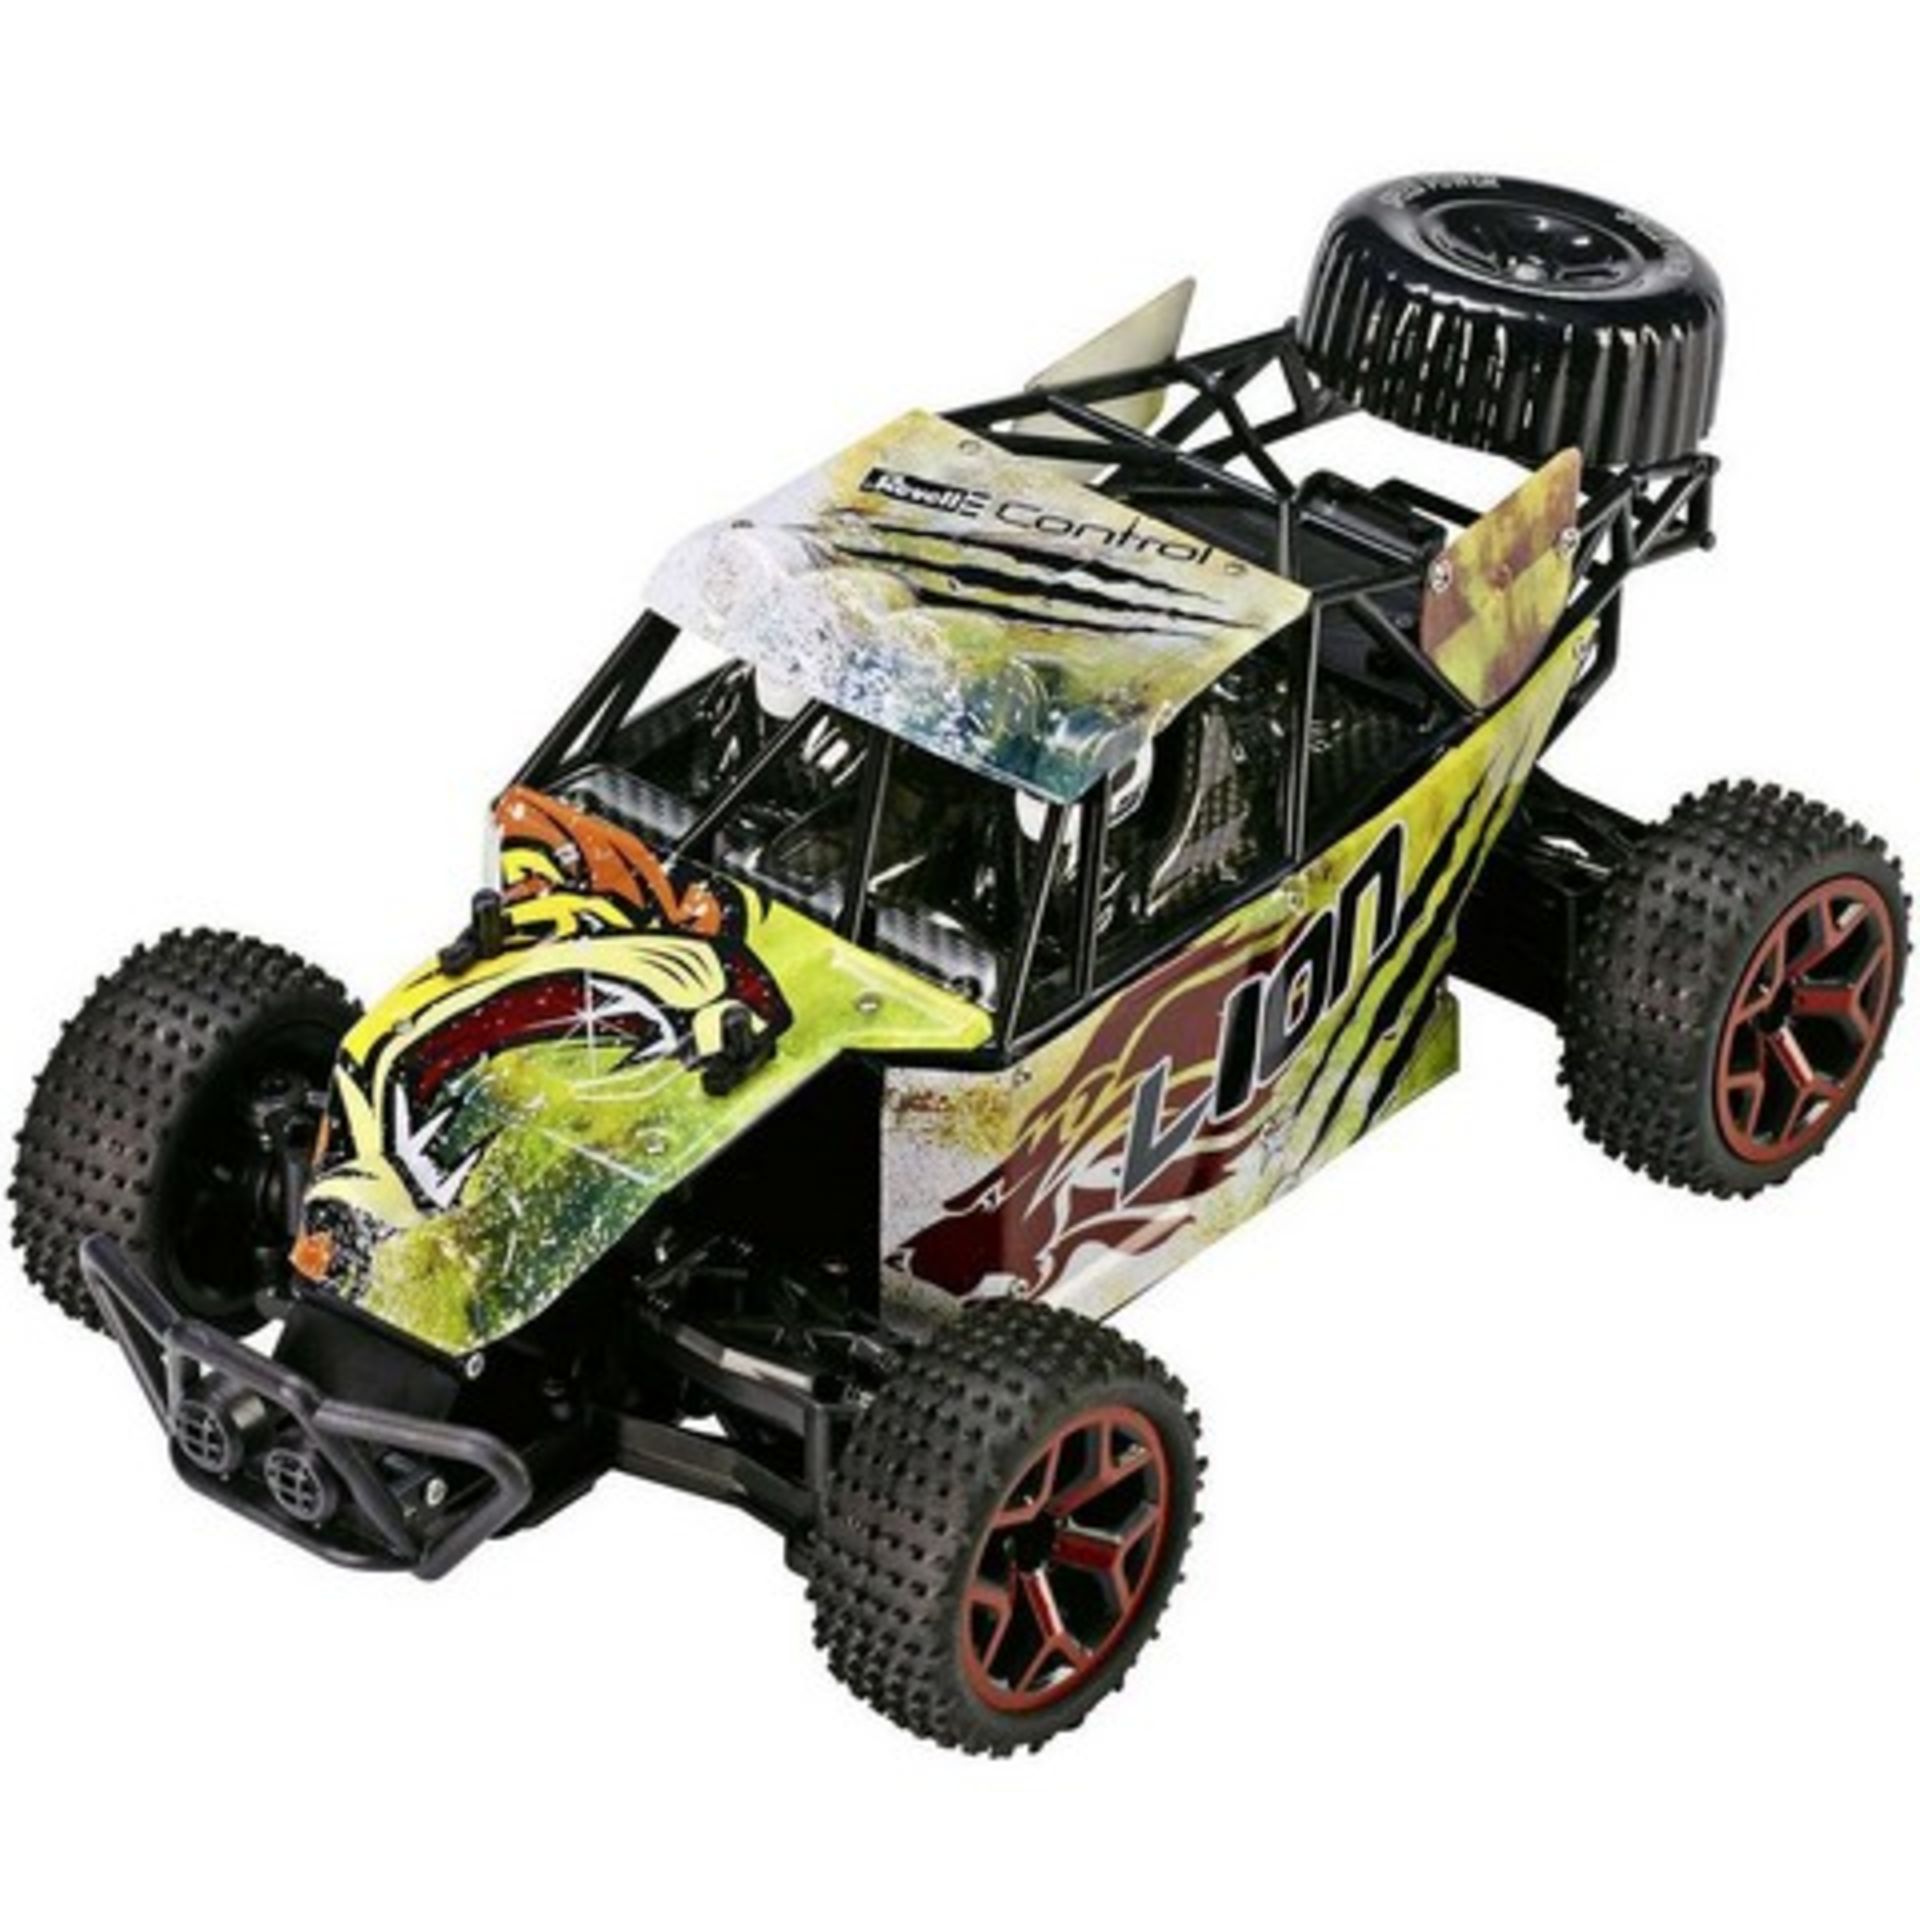 + VAT Brand New Revell R/C 4 Wheel Drive Sand Buggy Lion Up To 15 kph 2.4GHz 2 Channel Remote - Image 2 of 5